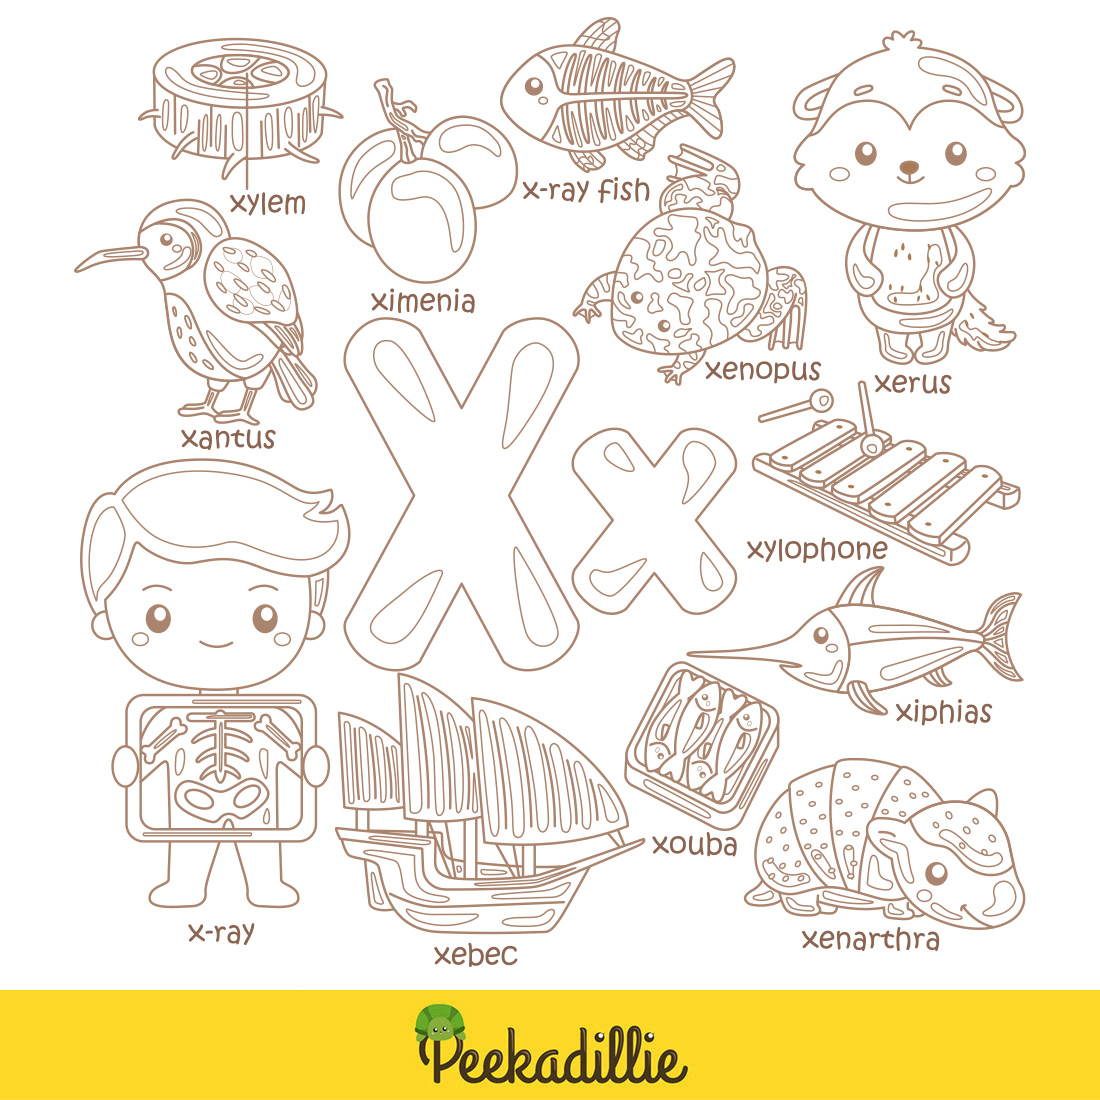 Alphabet X For Vocabulary School Letter Reading Writing Font Study Learning Student Toodler Kids Xylem Ximenia Xray Kids Xray Fish Xylophone Xenarthra Xebec Xantus Xenopus Xiphias Xerus Xouba Lesson Cartoon Coloring Pages For Kids and Adult preview image.